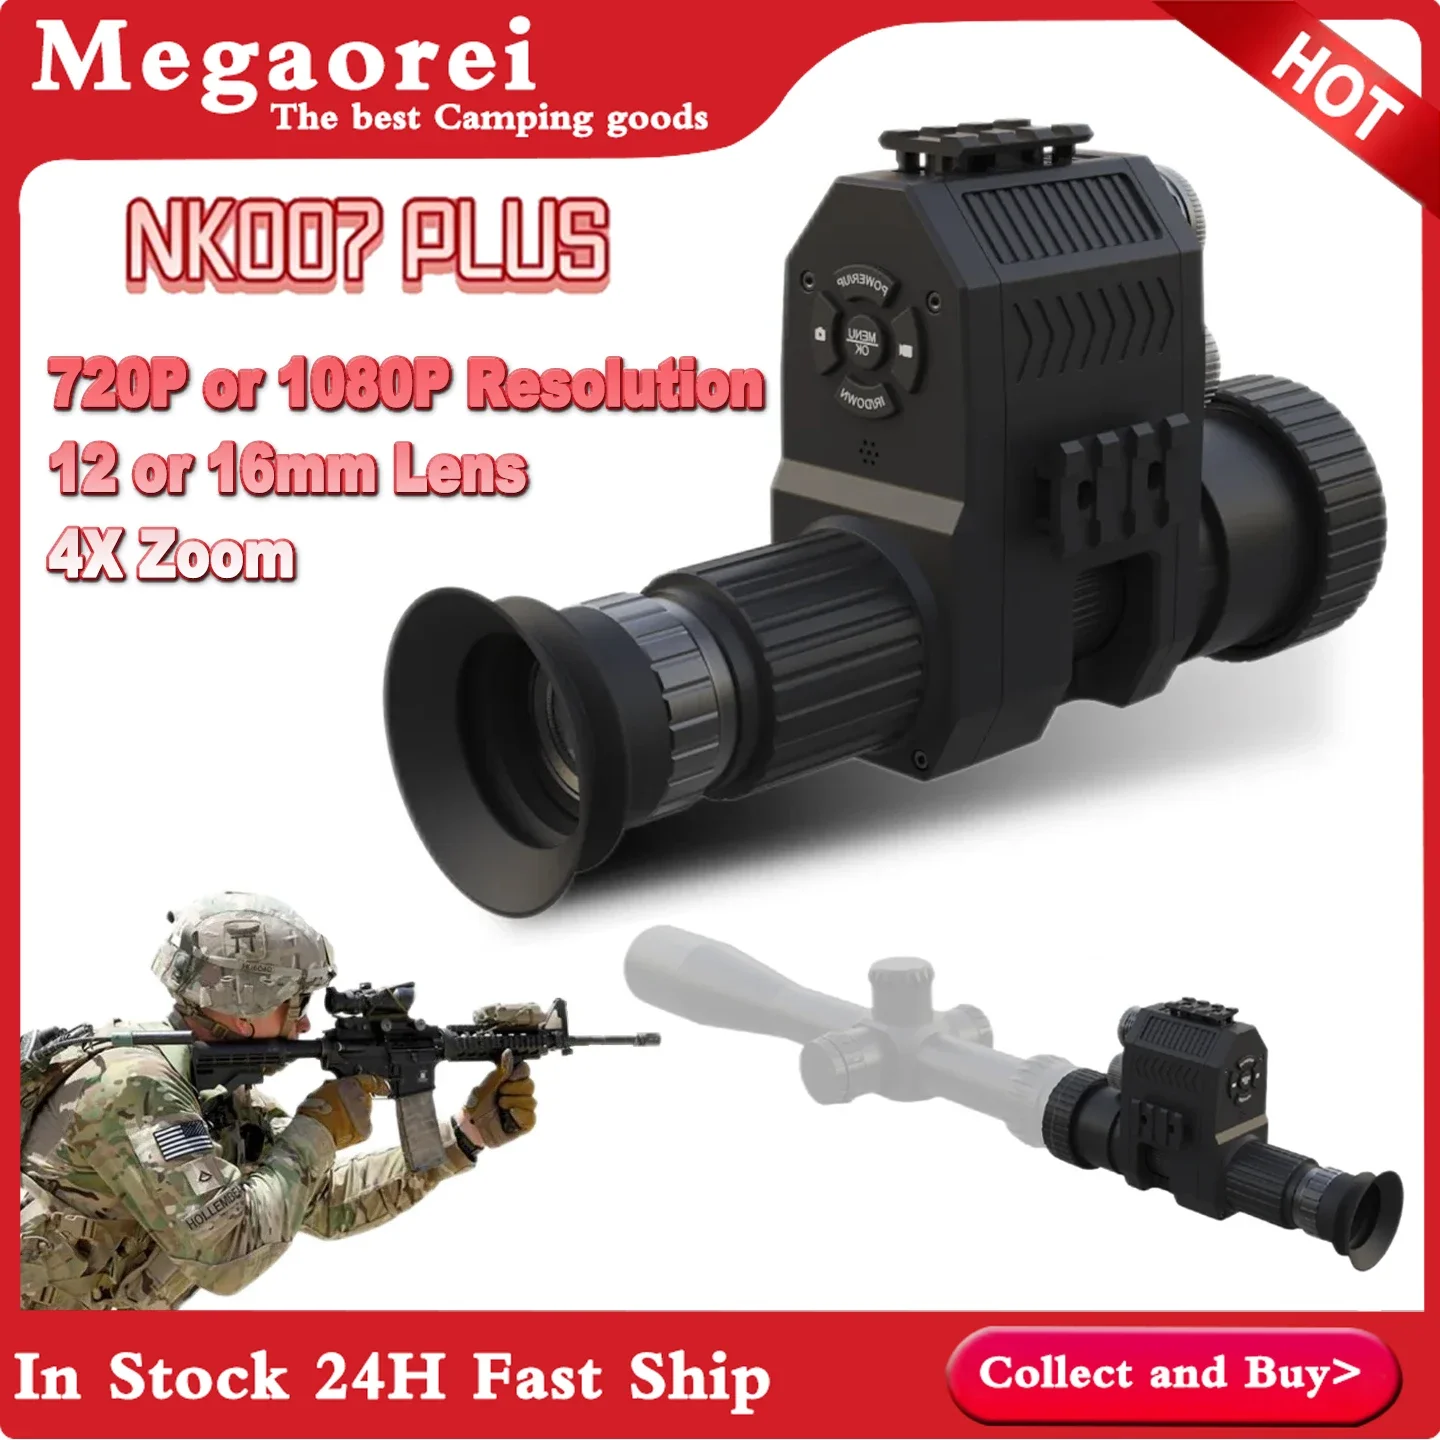 

Megaorei NK007 NEW 4X Zoom Infrared Night Vision Scope 1080P Digital Night Vision Monocular Device Full Screen Hunting Cameras